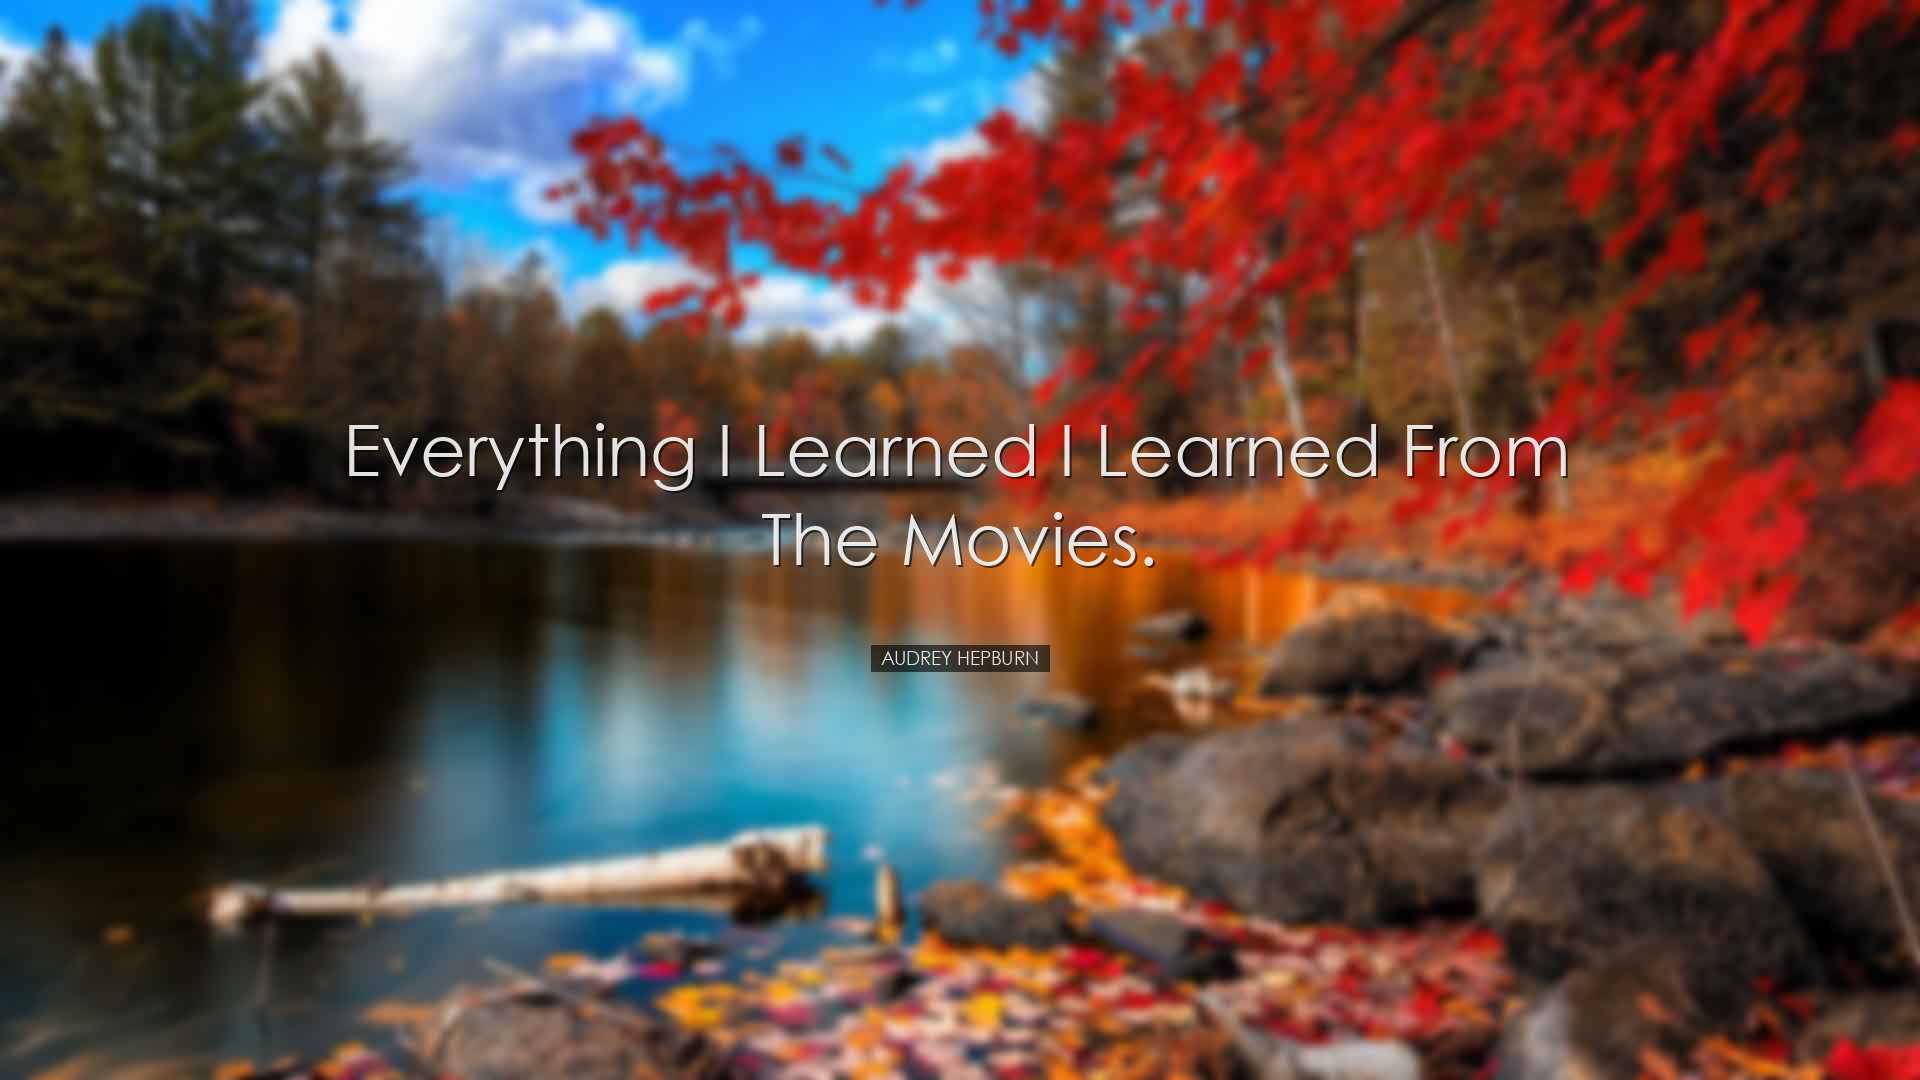 Everything I learned I learned from the movies. - Audrey Hepburn